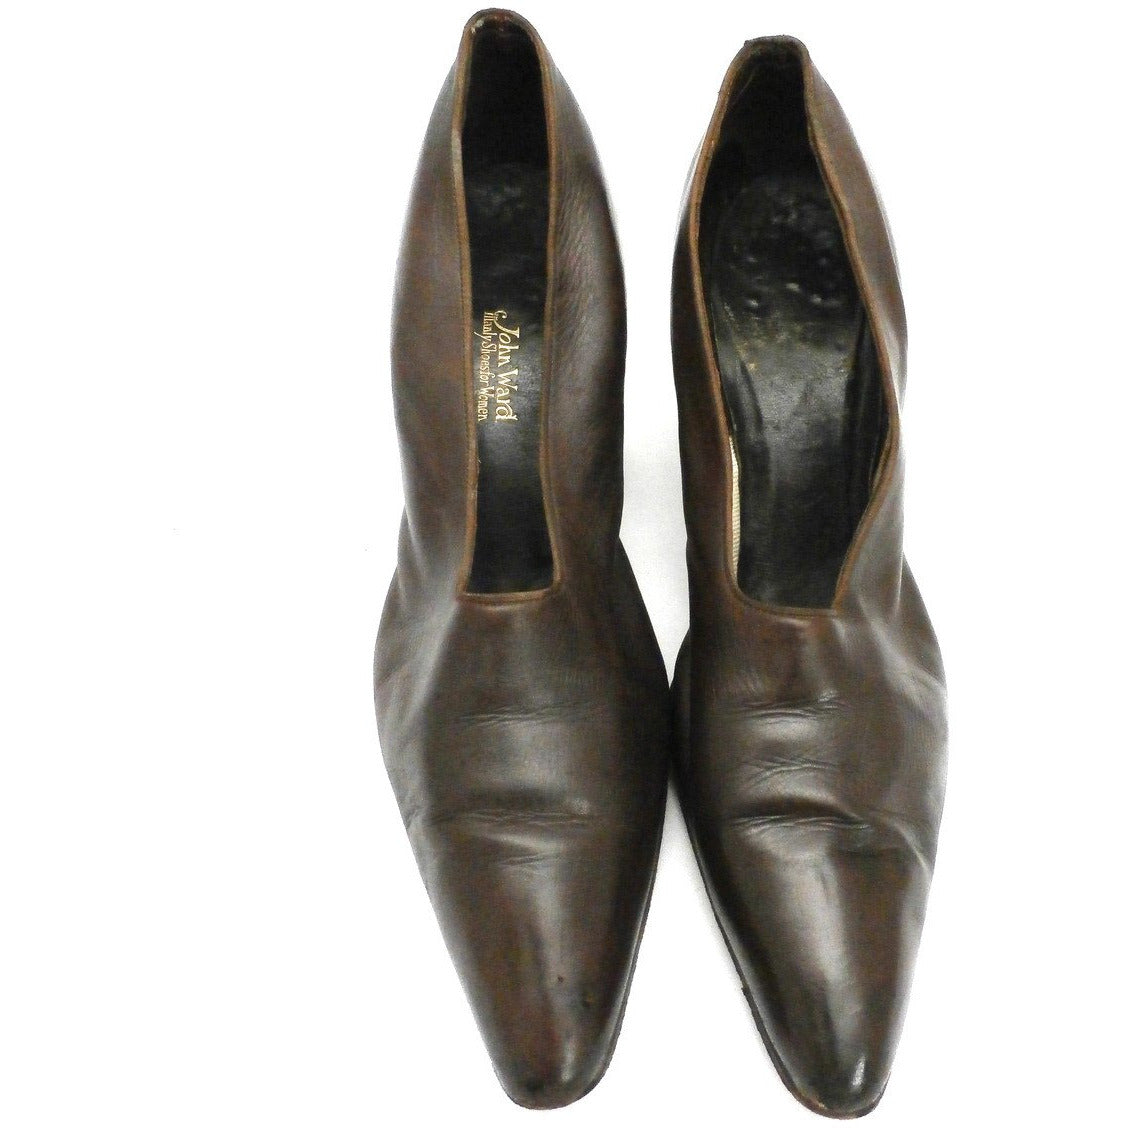 Vintage Ladies Shoes Pumps Brown Leather Late Teens-Early 1920s Size 6 ...